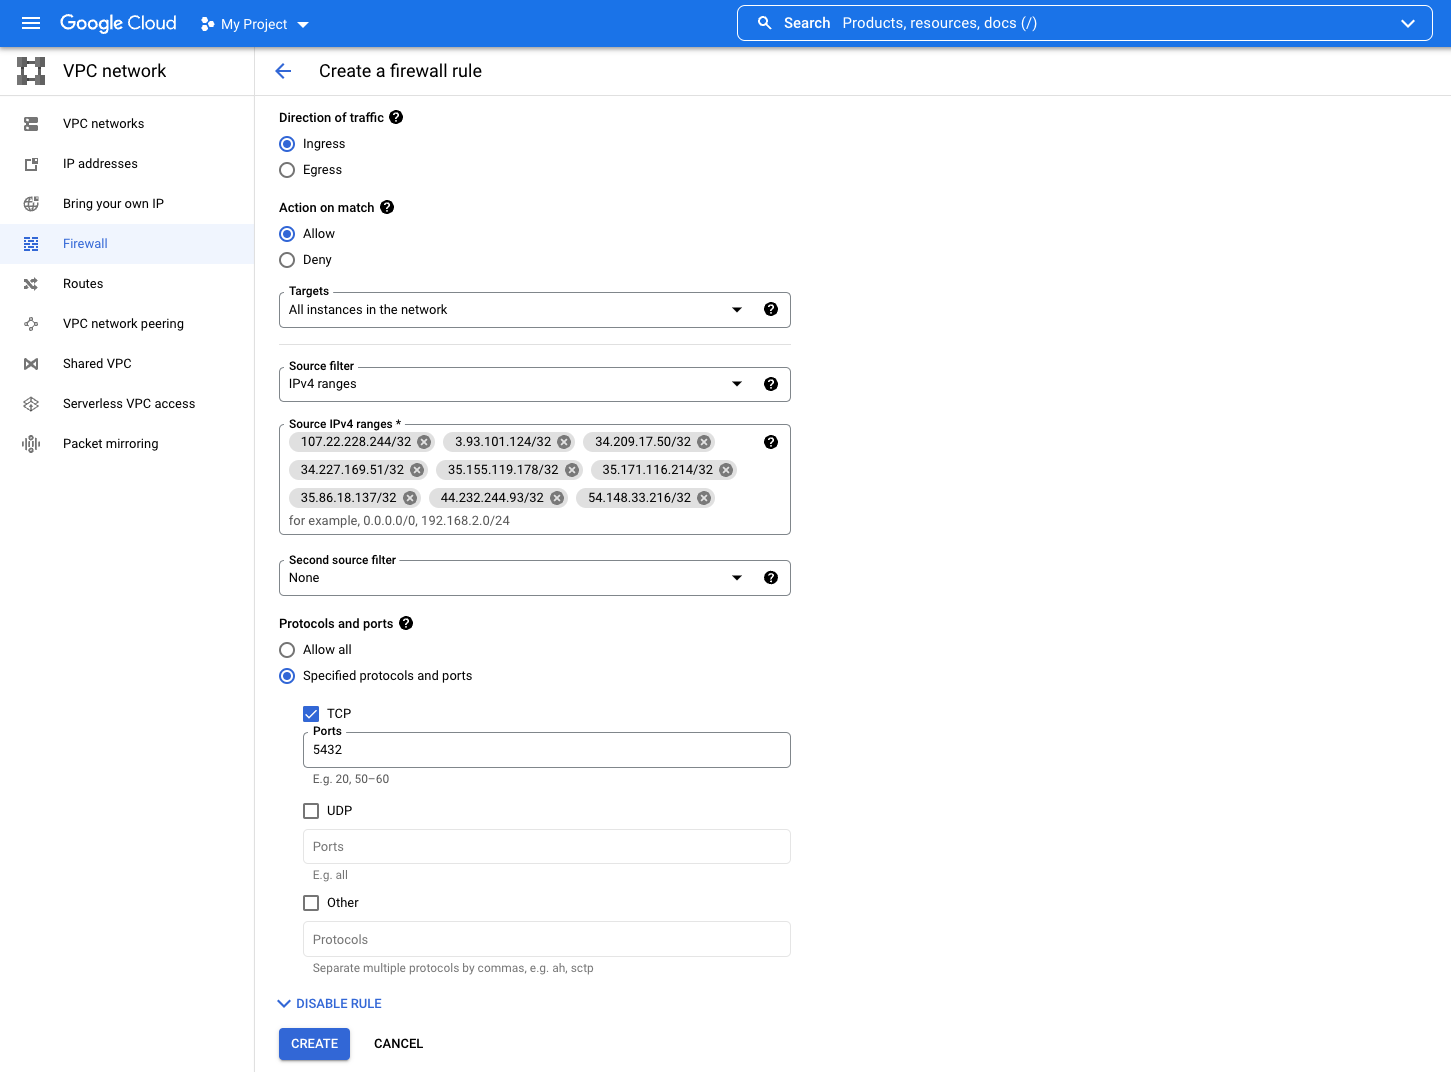 Add Superblocks IP addresses to the allow list in GCP